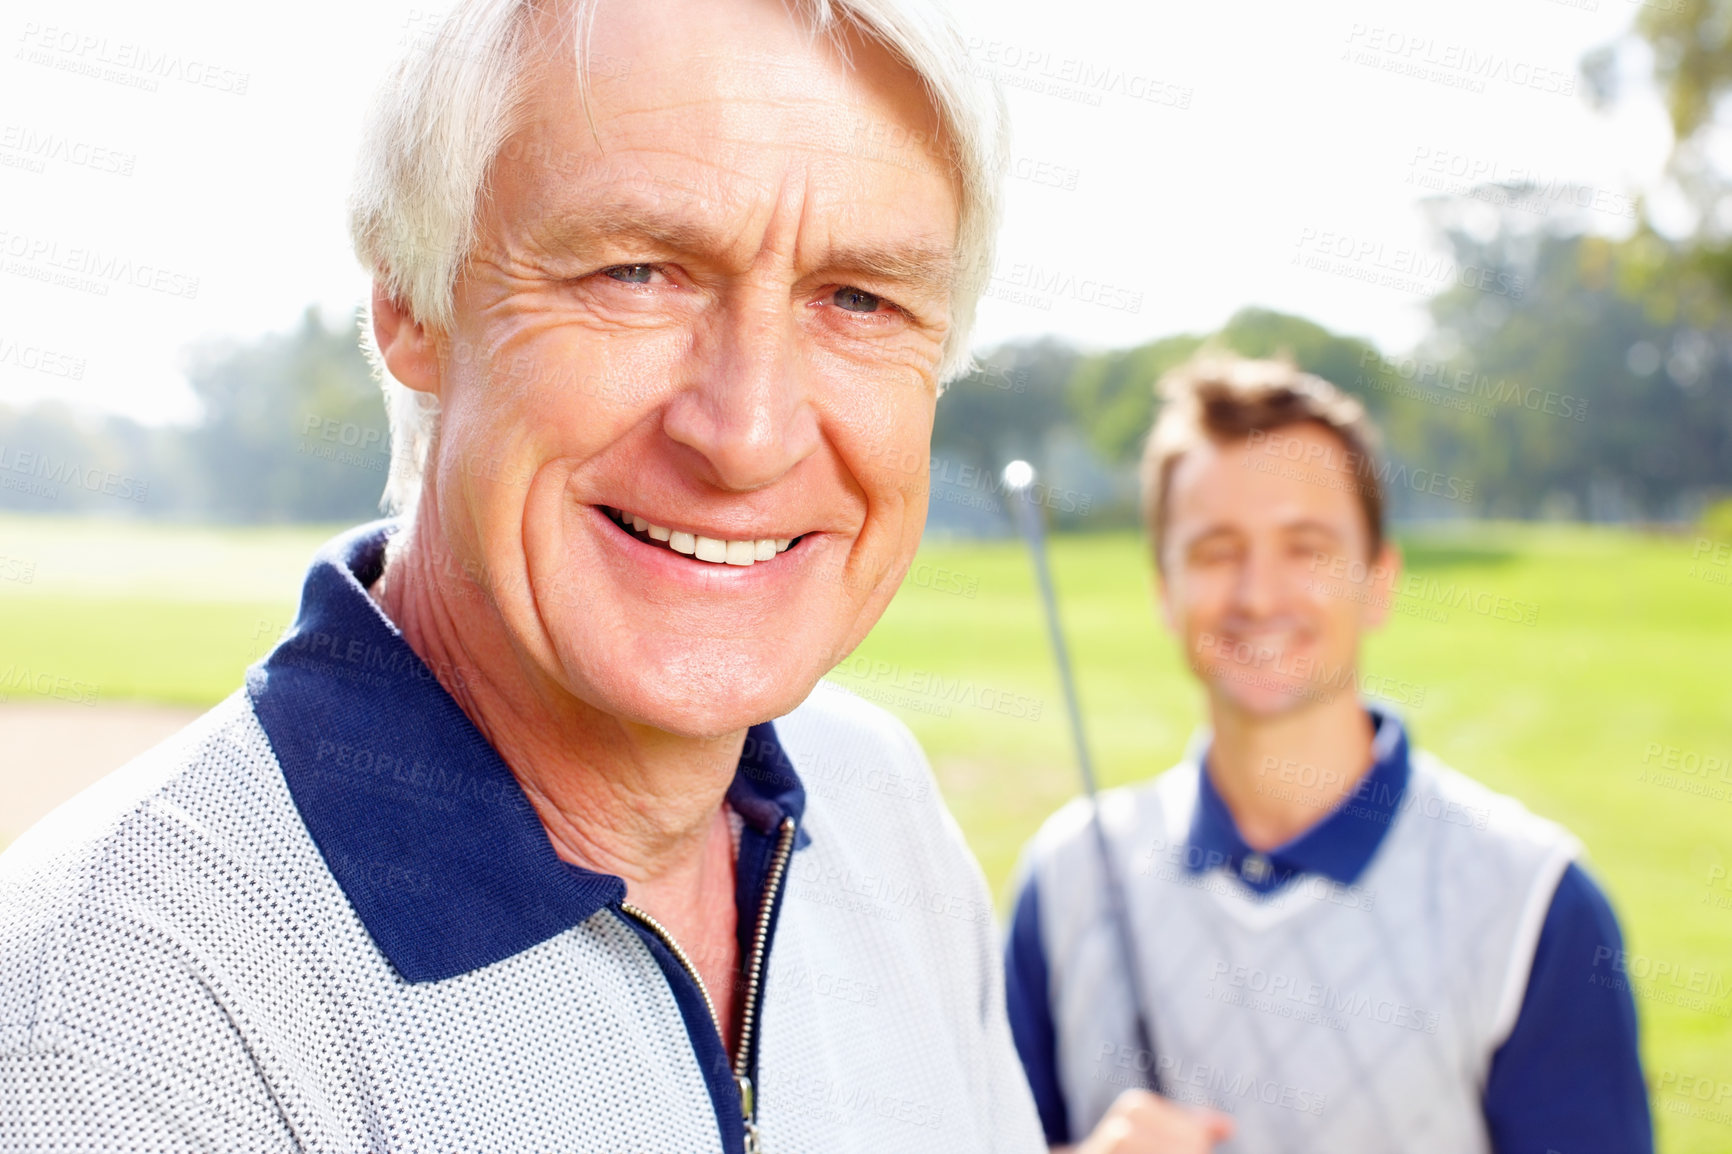 Buy stock photo Closeup of senior man smiling with son holding a golf club in background